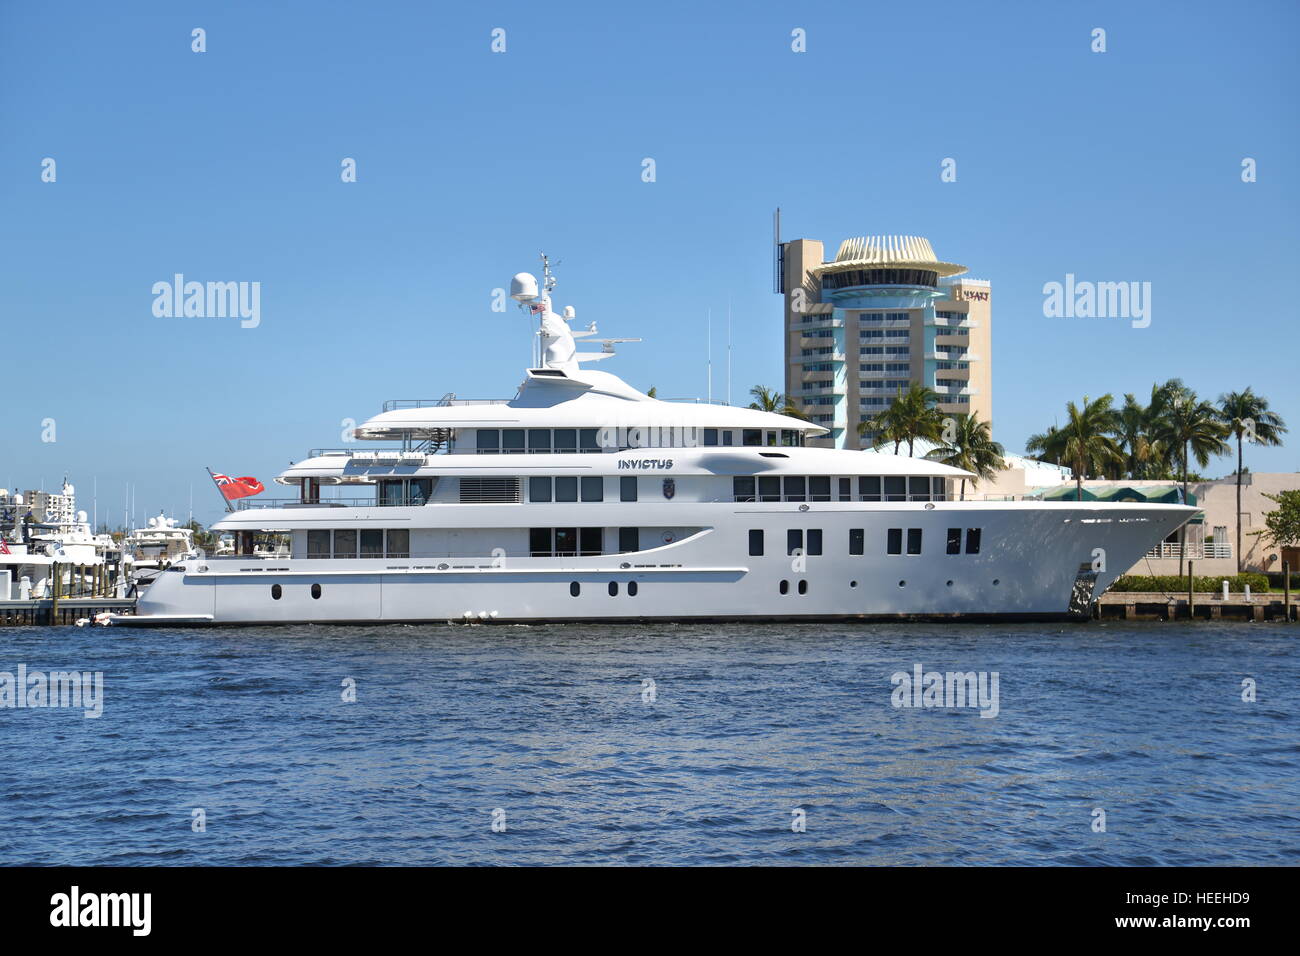 The luxury yacht Invictus moored at Fort Lauderdale, Florida, USA in front of the Hyatt hotel Stock Photo